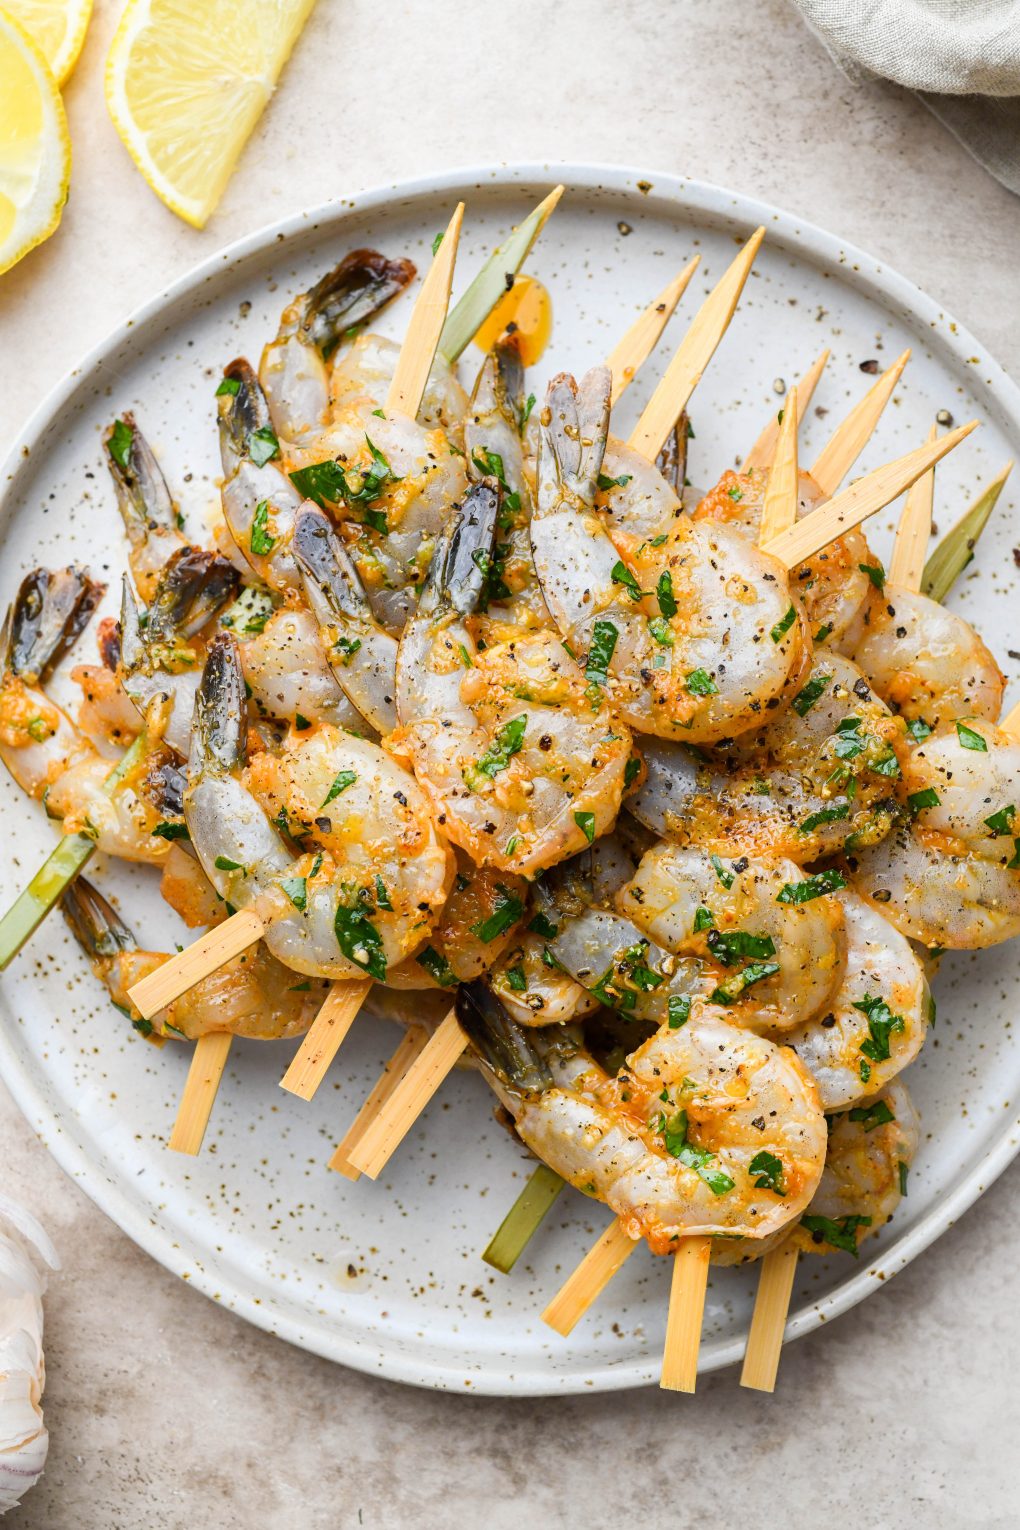 Overhead image of marinated shrimp threaded onto short wooden bamboo skewers. On a light colored speckled plate.